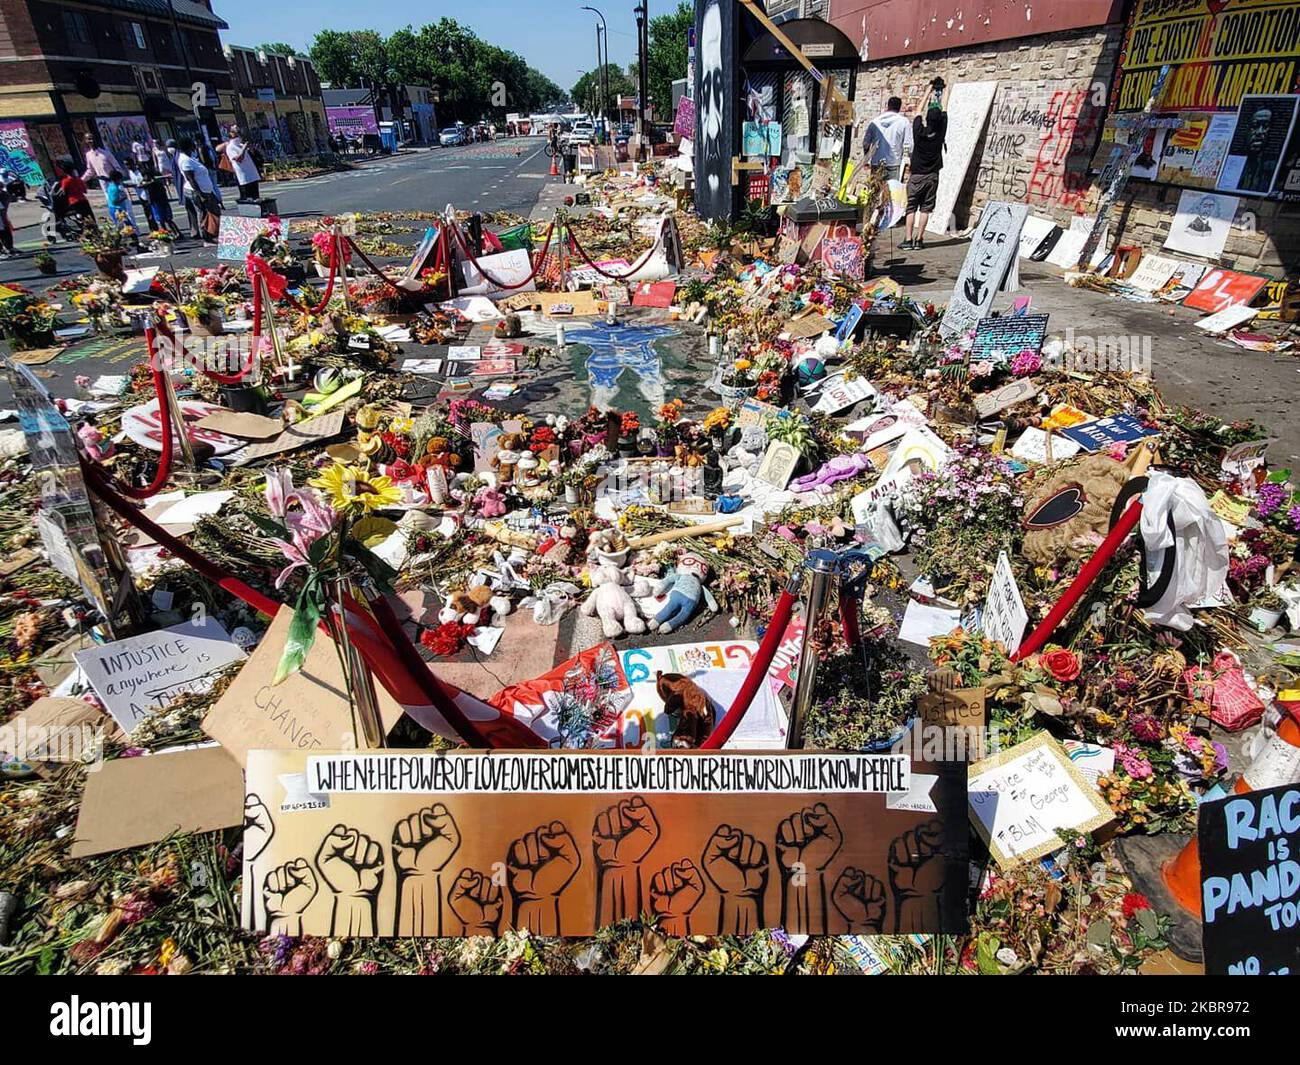 A general view of George Floyd memorial in Minneapolis, United States, on June 16, 2020. Minneapolis officials say memorial could become permanent at intersection where the police murder of George Floyd sparked weeks of global unrest. This comes as the neighborhood market Cup Foods reopened Monday at 38th Street and Chicago Avenue following weeks of protests and mourning outside the store. (Photo by Karla Ann Cote/NurPhoto) Stock Photo